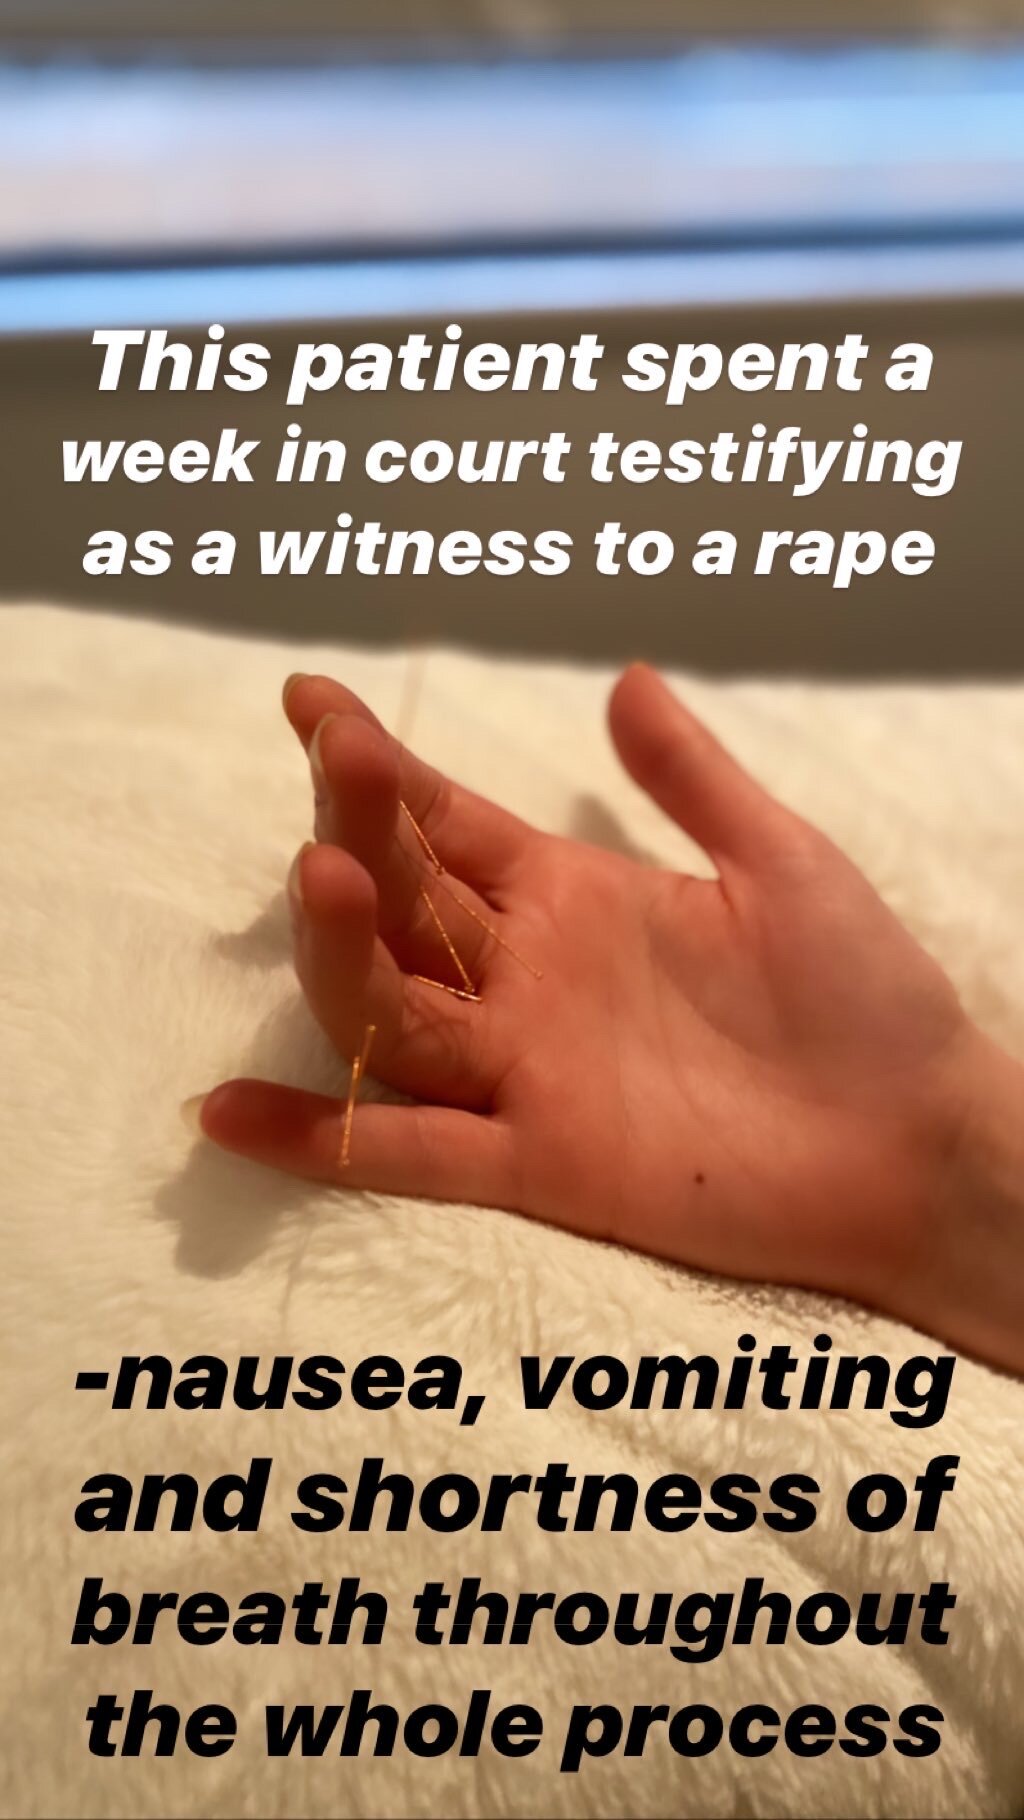  SuJok acupuncture based in Vancouver used for treating mental health. Patient received treatment for stress, nausea, vomiting and fatigue after testifying as a witness to a rape. 